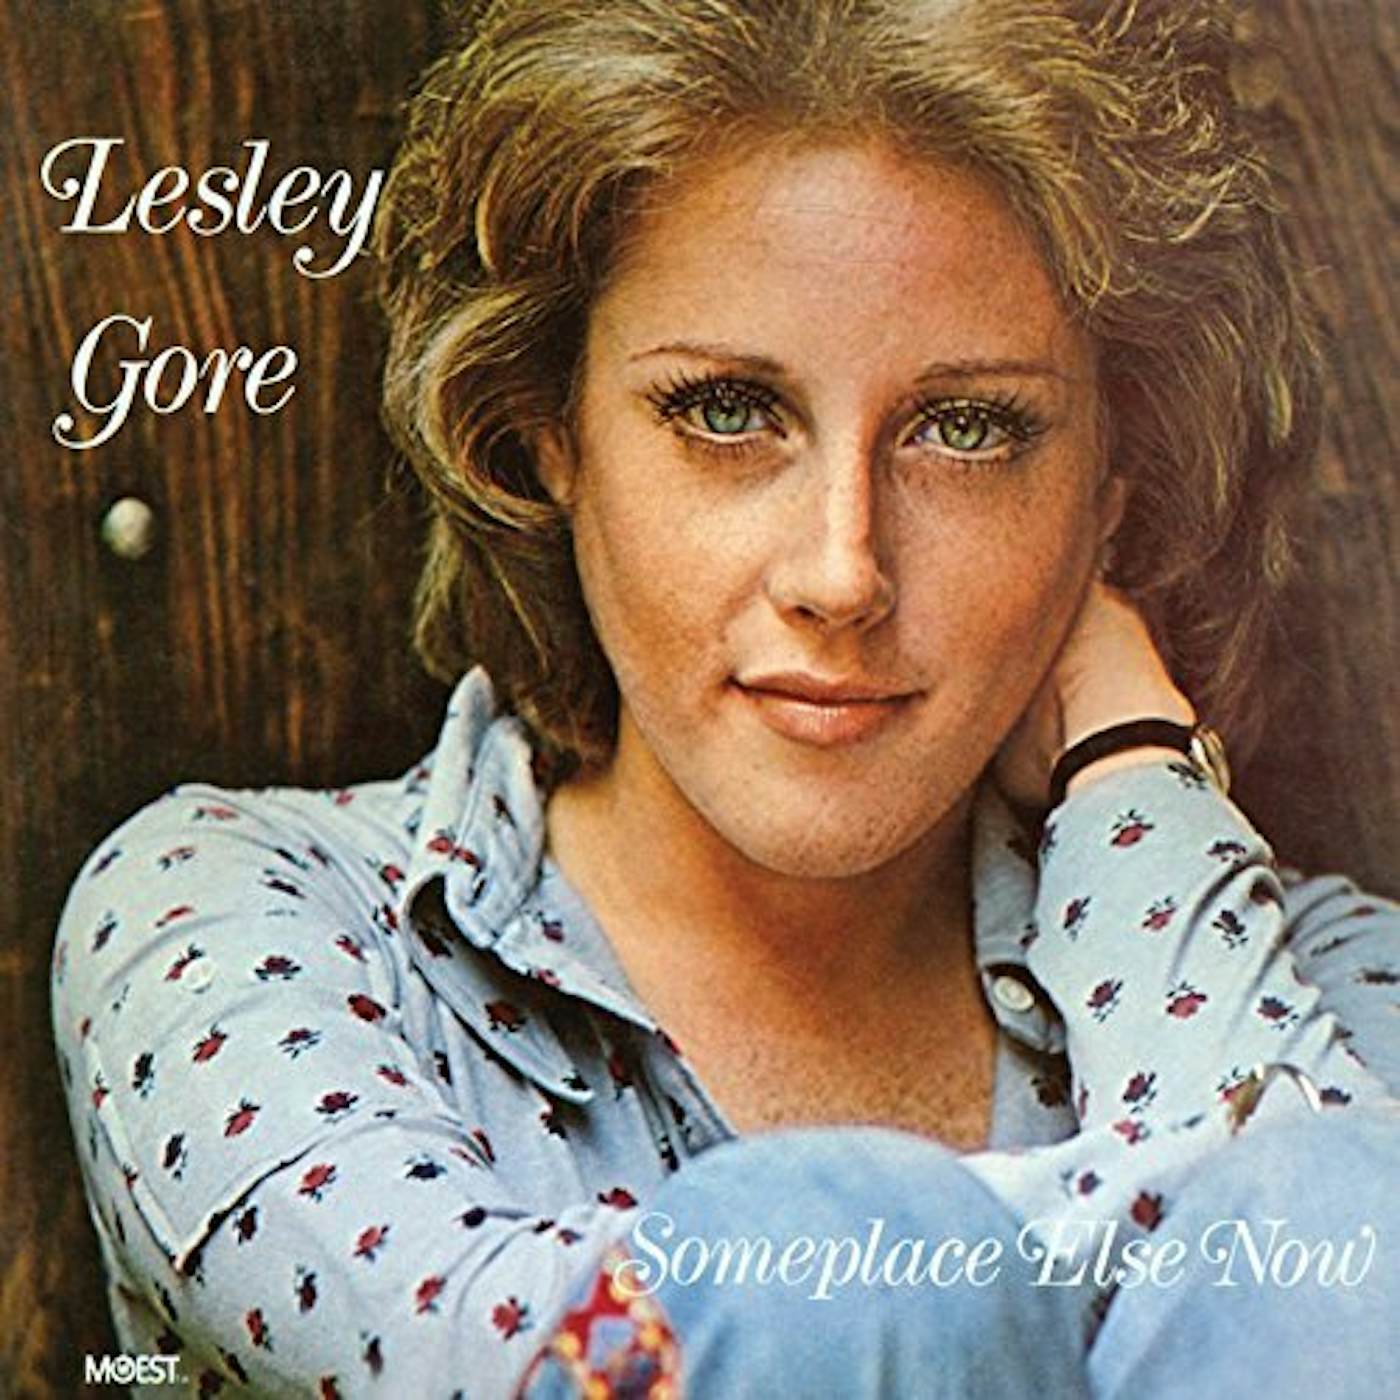 Lesley Gore SOMEPLACE ELSE NOW CD